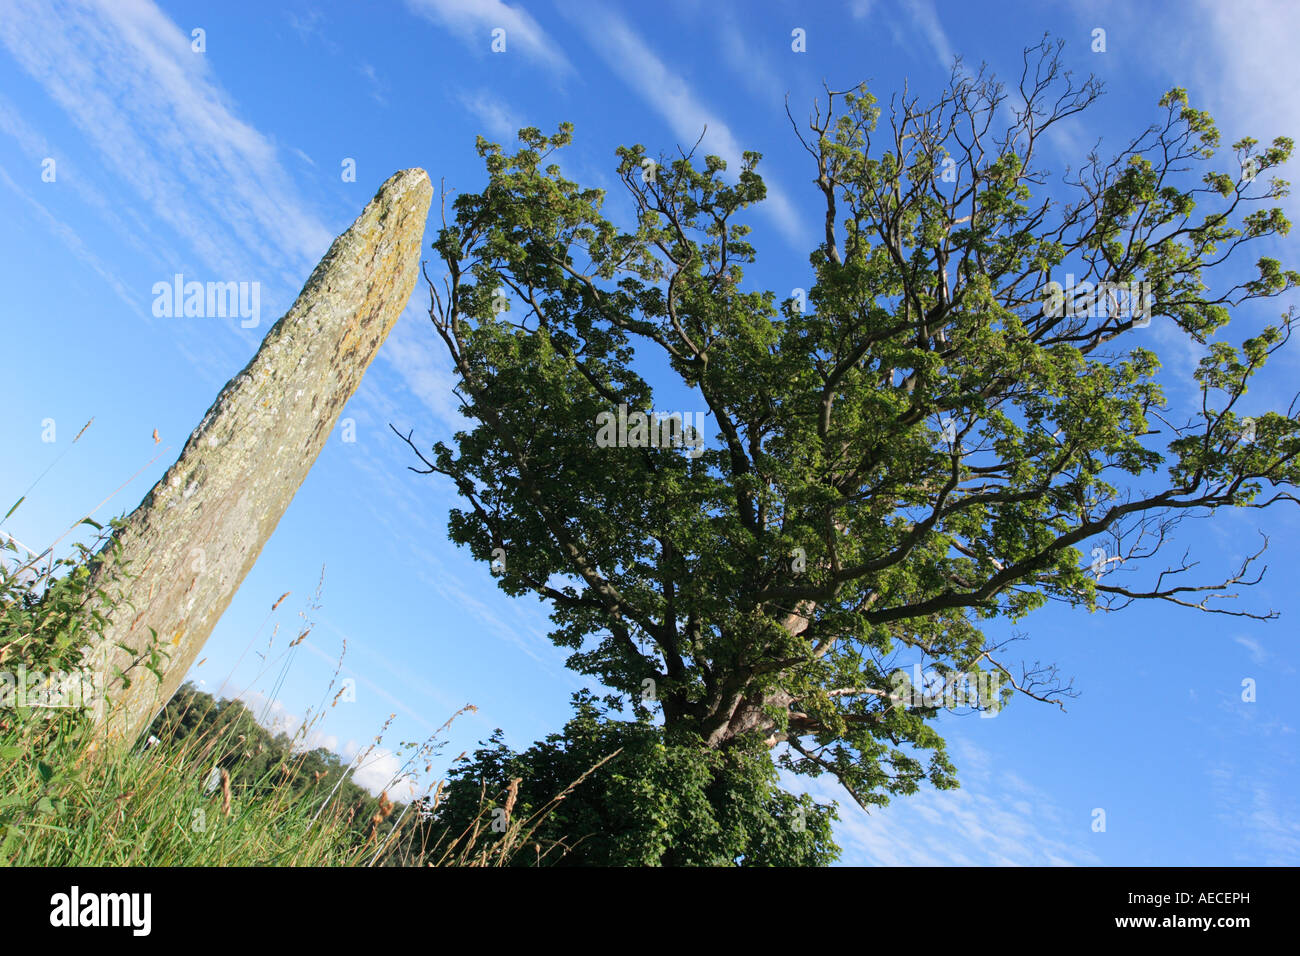 Parkmill Cross Slab. A carved standing stone near Alloa, Clackmannanshire. Stock Photo